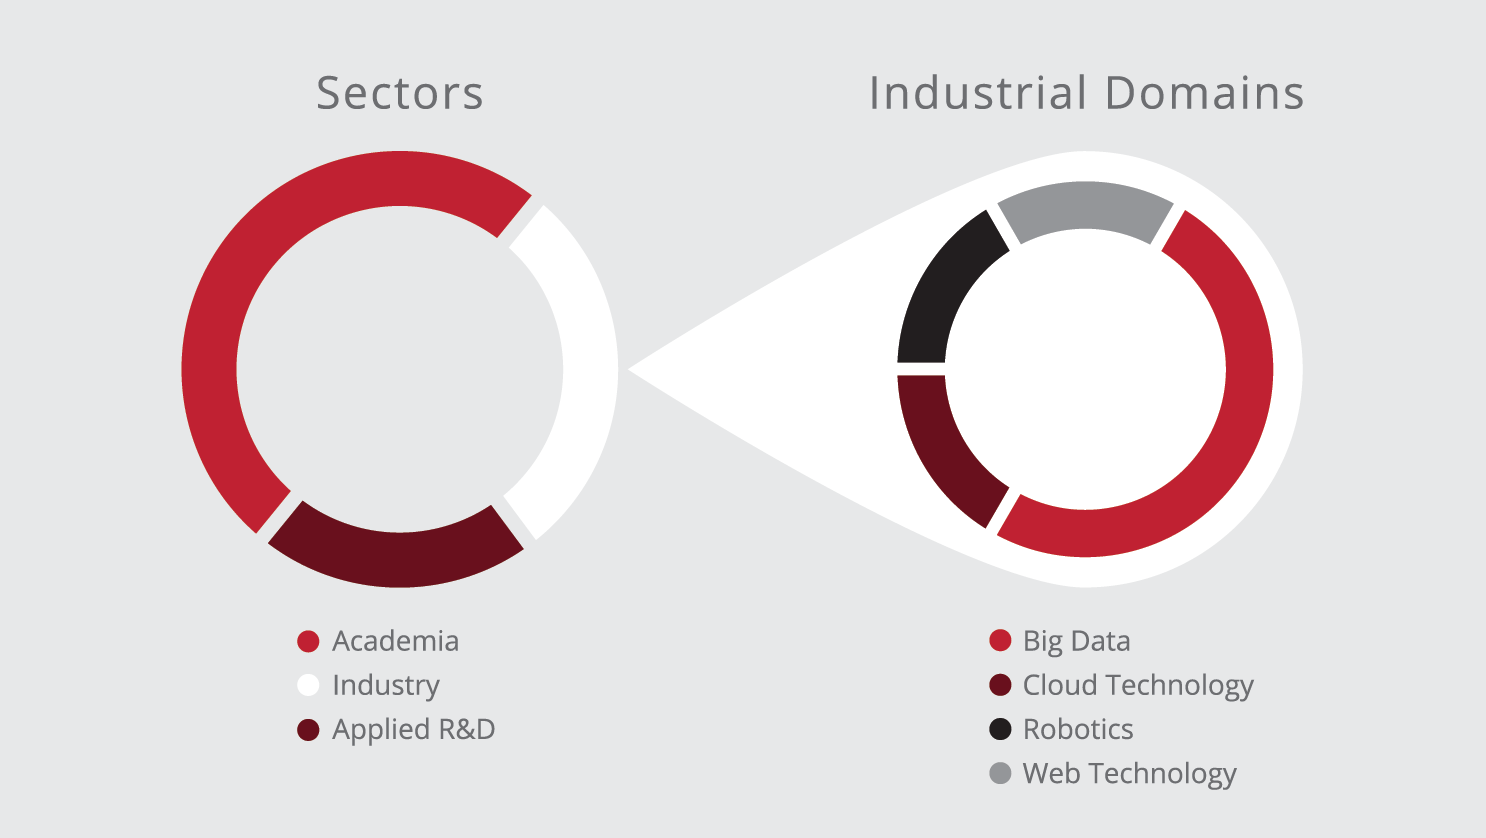 The image is a donut chart that represents different sectors and industrial domains. The chart is divided into two main parts. The first part represents sectors, which are further divided into three categories: Academia, Industry, and Applied R&D. The second part of the chart represents industrial domains, which are divided into four categories: Big Data, Cloud Technology, Robotics, and Web Technology.